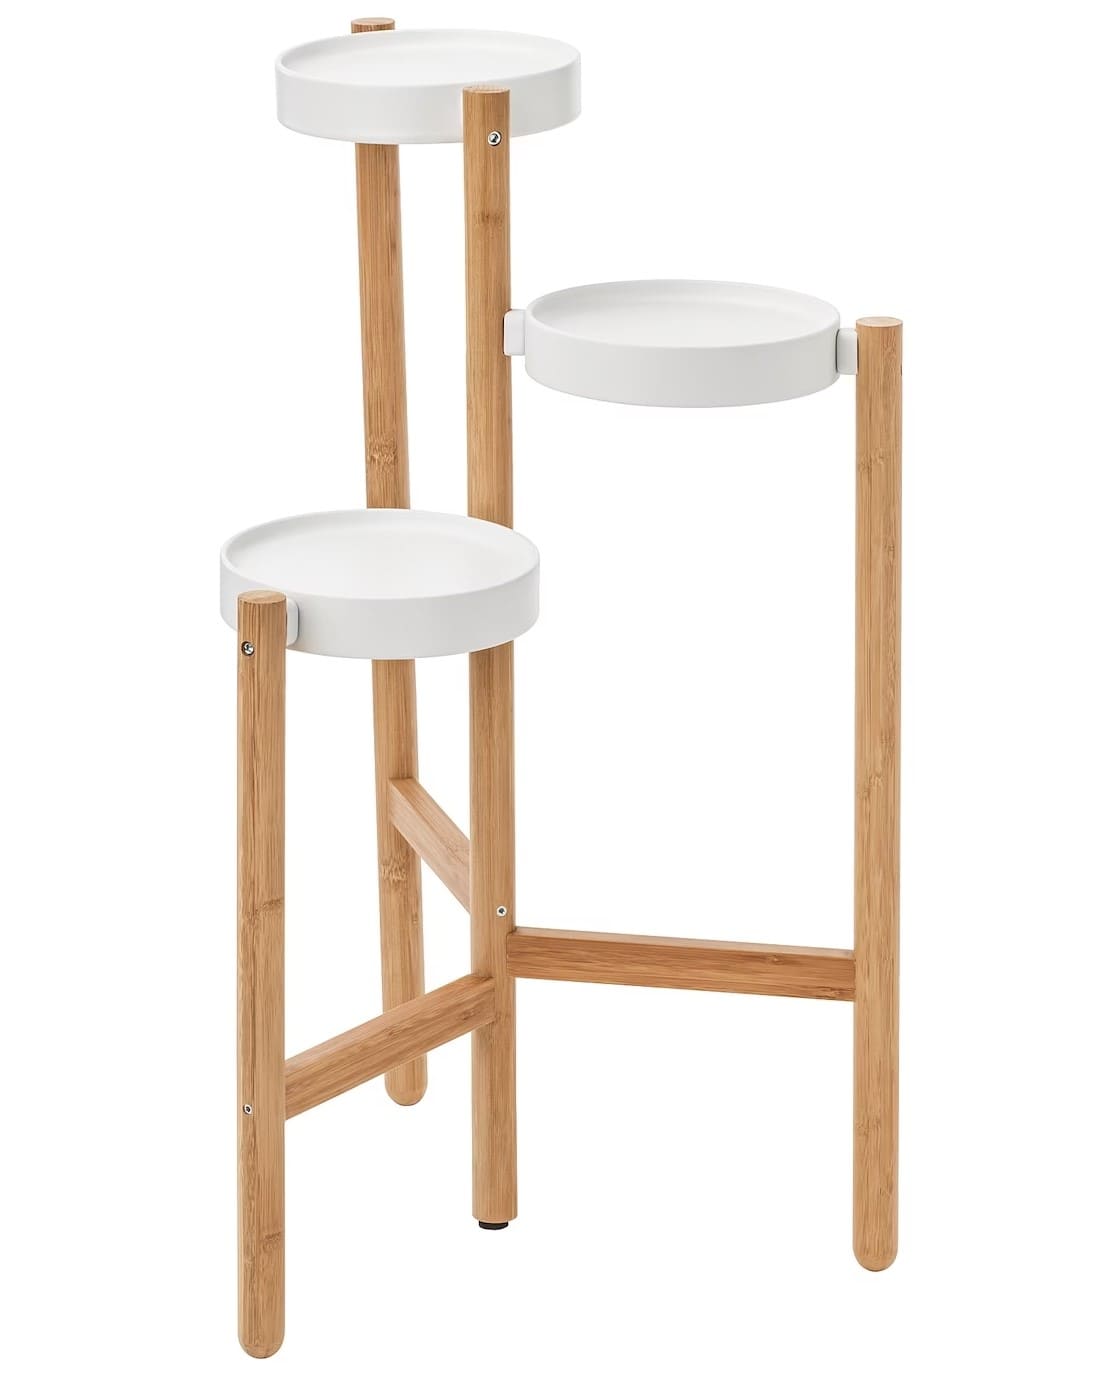 SATSUMAS Plant stand by Ikea